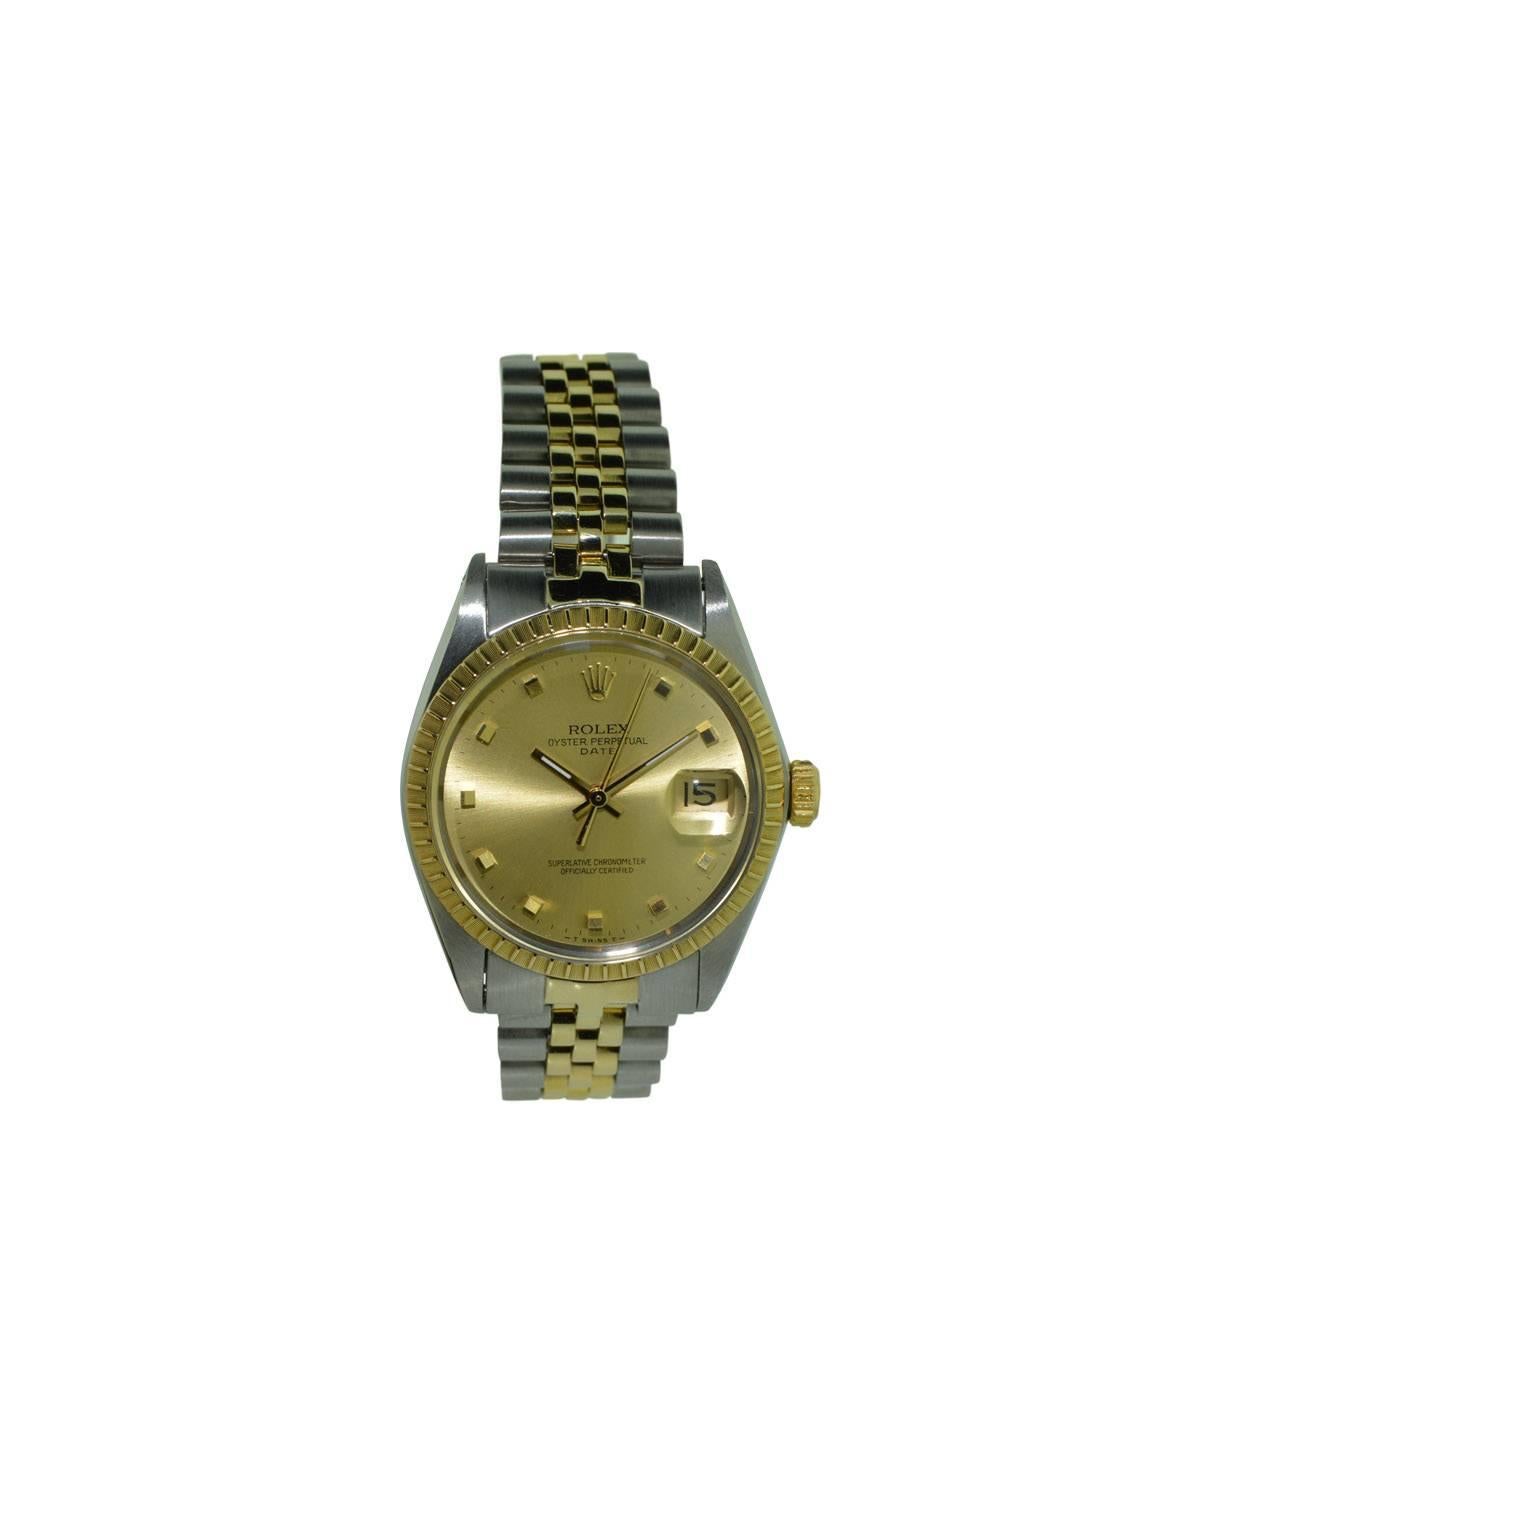 FACTORY / HOUSE: Rolex Watch Company
STYLE / REFERENCE: Datejust / 1505
METAL / MATERIAL: Stainless Steel / 18Kt. Yellow Gold
DIMENSIONS:  46mm  X  33mm
CIRCA: 1969 / 70
MOVEMENT / CALIBER: Perpetual Winding / 26 Jewels / Cal. 1570
DIAL / HANDS: